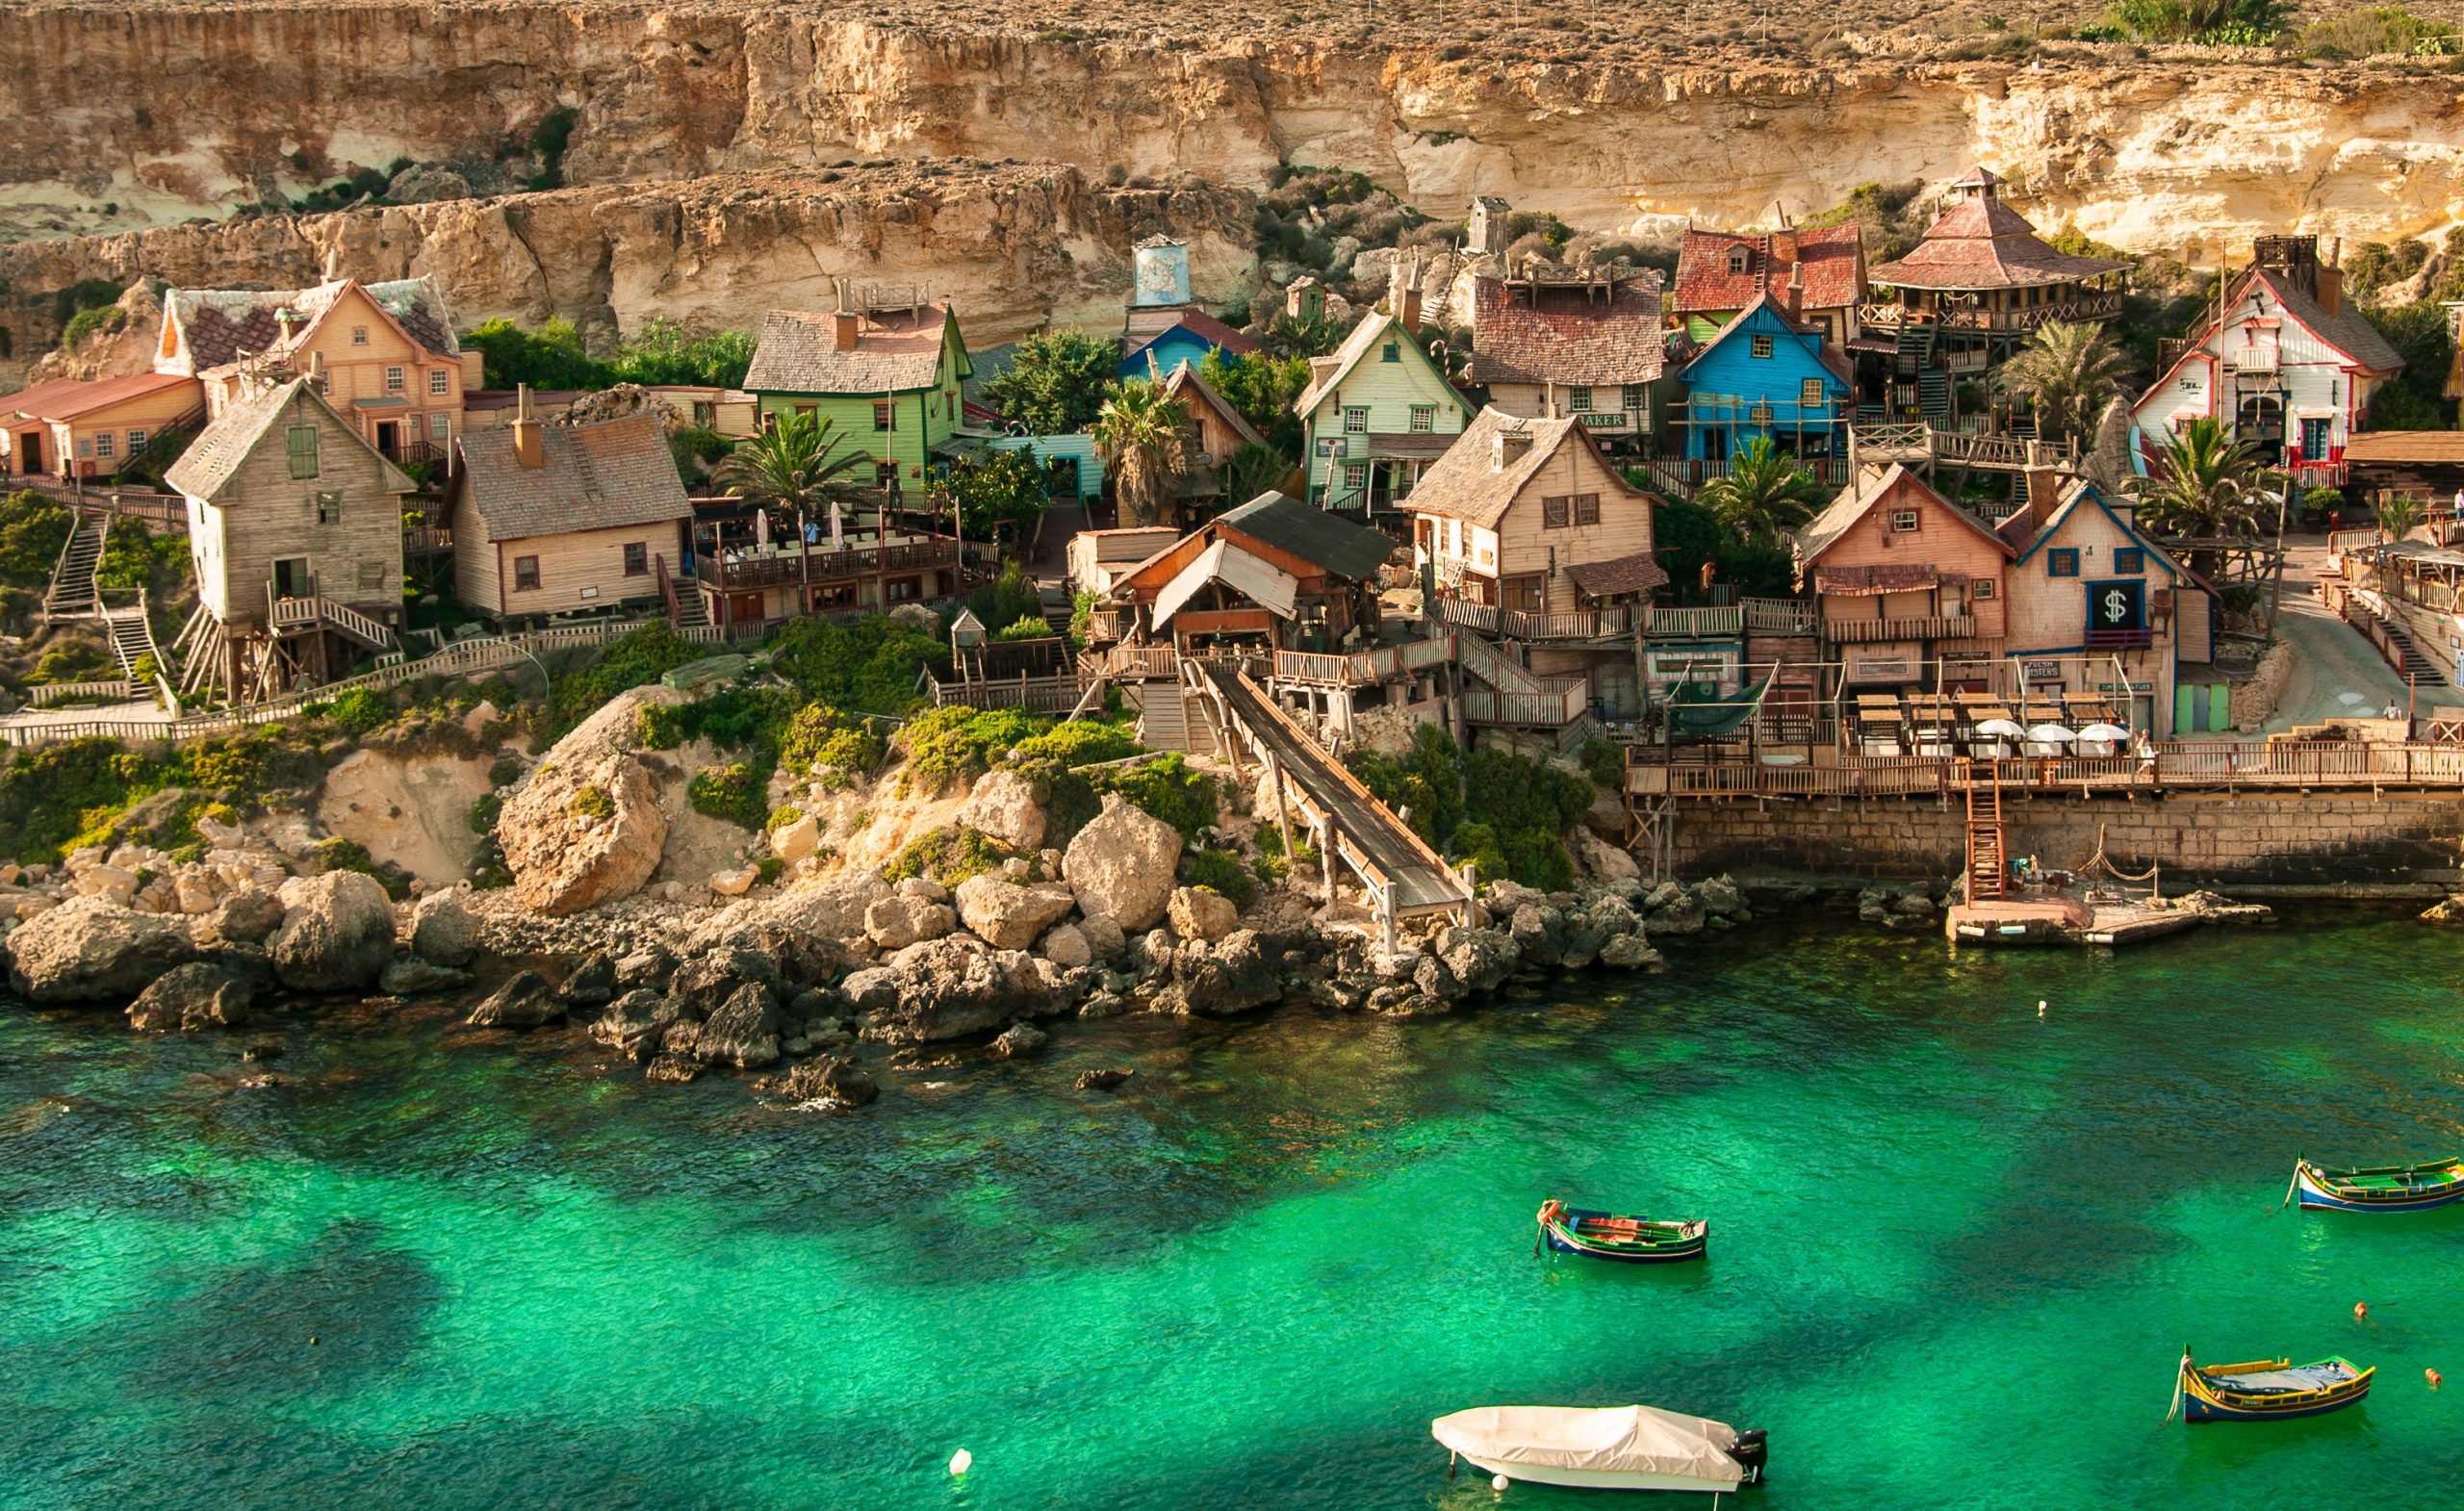 5 totally gay things you’ll love about Malta